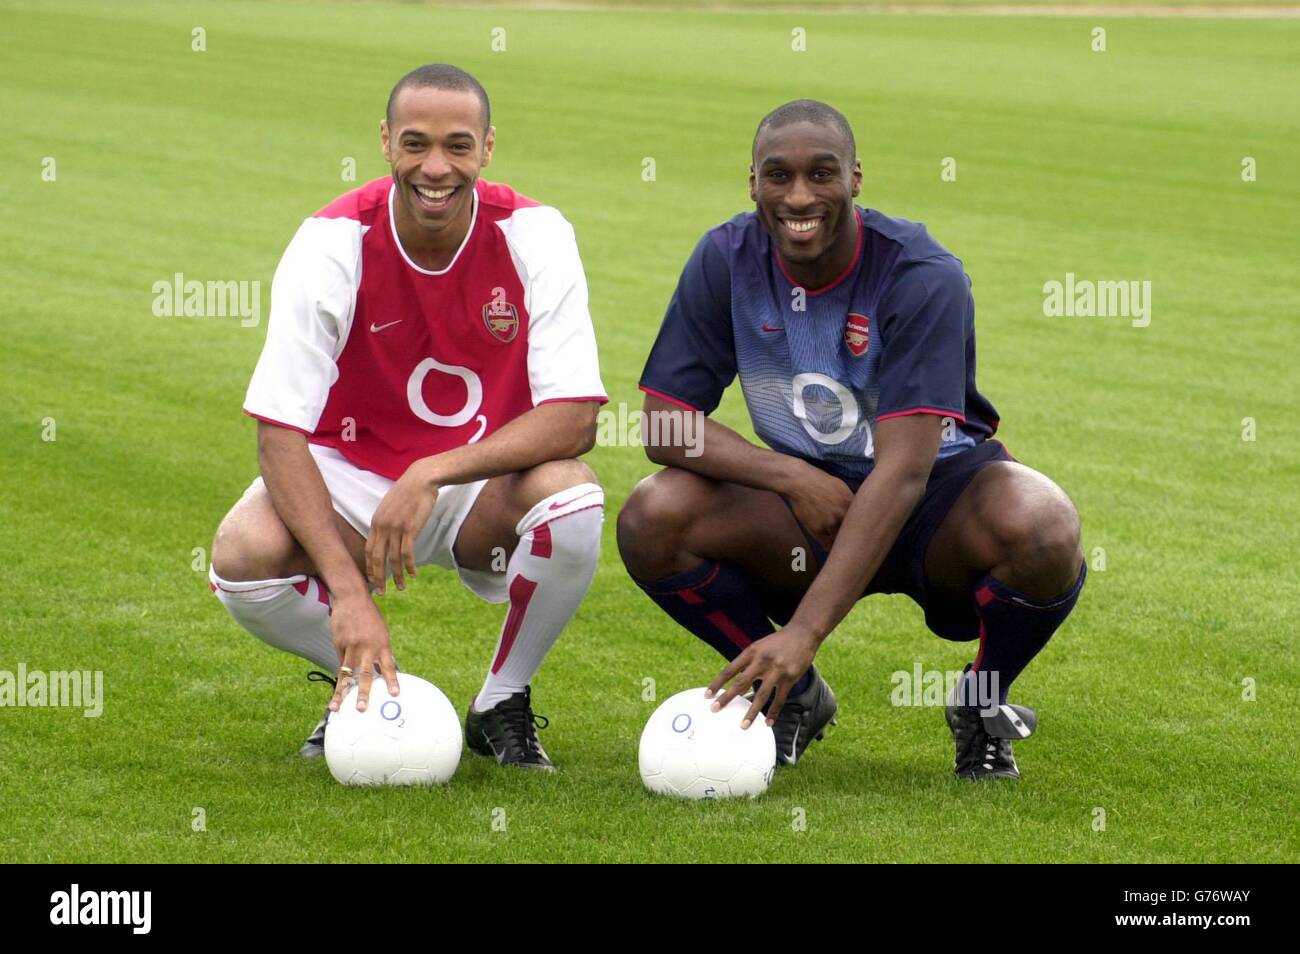 Arsenal players Thierry Henry (left) and Sol Campbell, model the club's new football strip, promoting their new sponsor's logo at London Colney. Arsenal have signed a sponsorship deal with O2, a leading provider of mobile communications services in Europe. * From August this year, O2 will become the official club sponsor and exclusive mobile communications partner to Arsenal, in the biggest club sponsorship deal the Gunners have ever signed. . Stock Photo